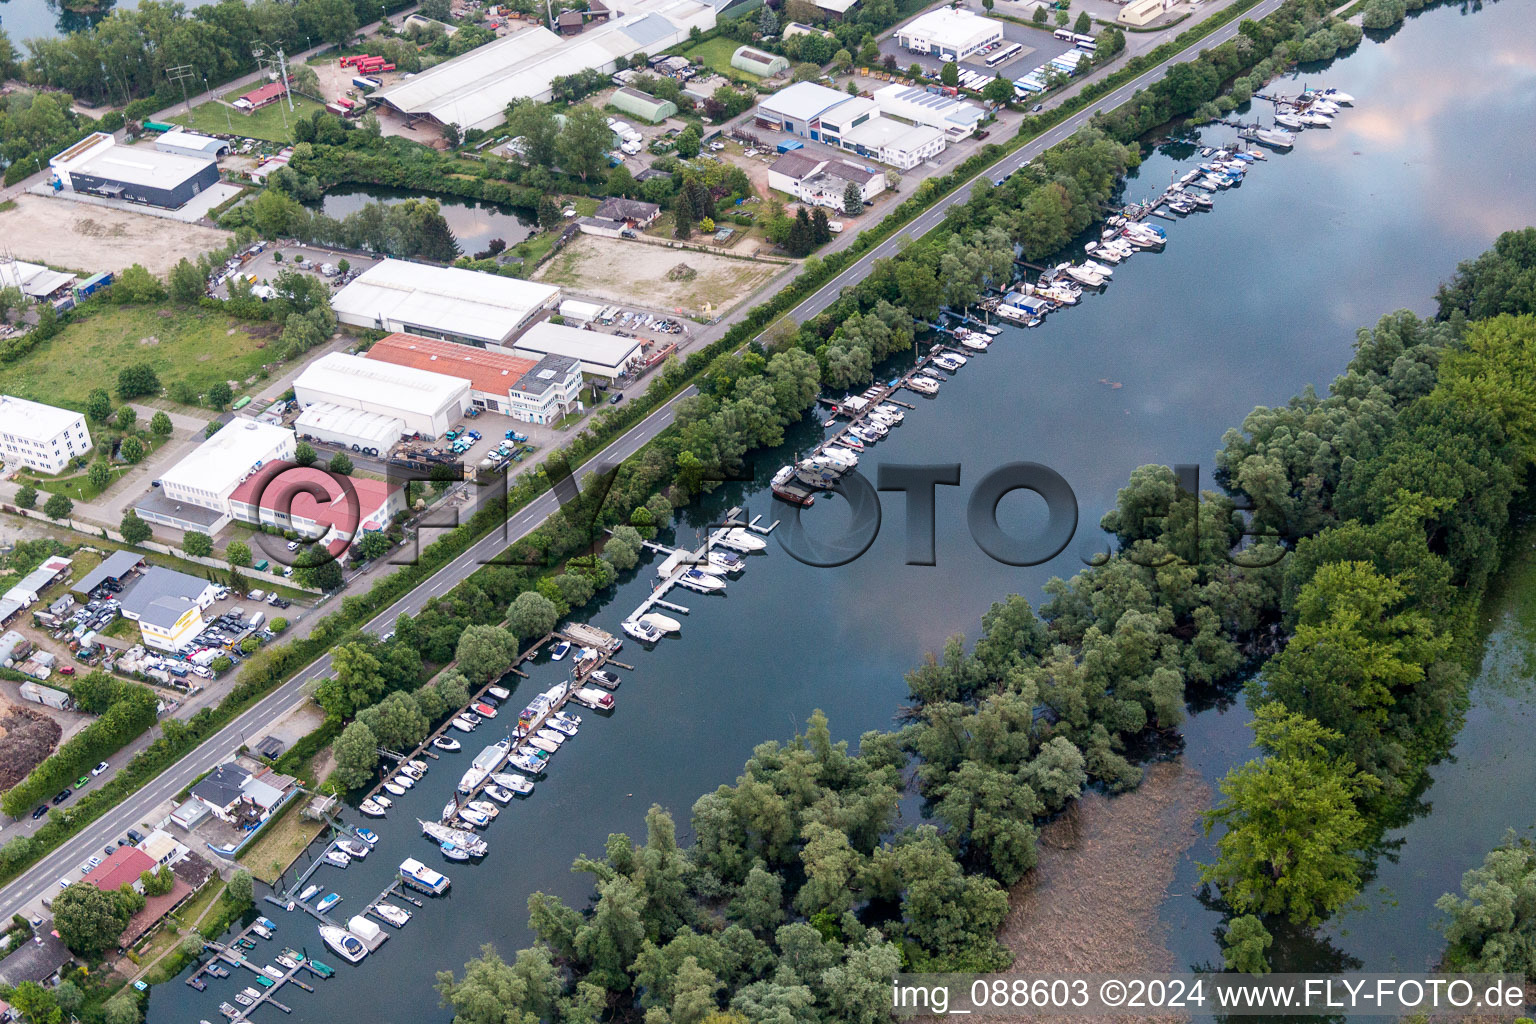 Pleasure boat marina with docks and moorings on the shore area of Lampertheimer Altrheins "KaiWest" in Lampertheim in the state Hesse, Germany